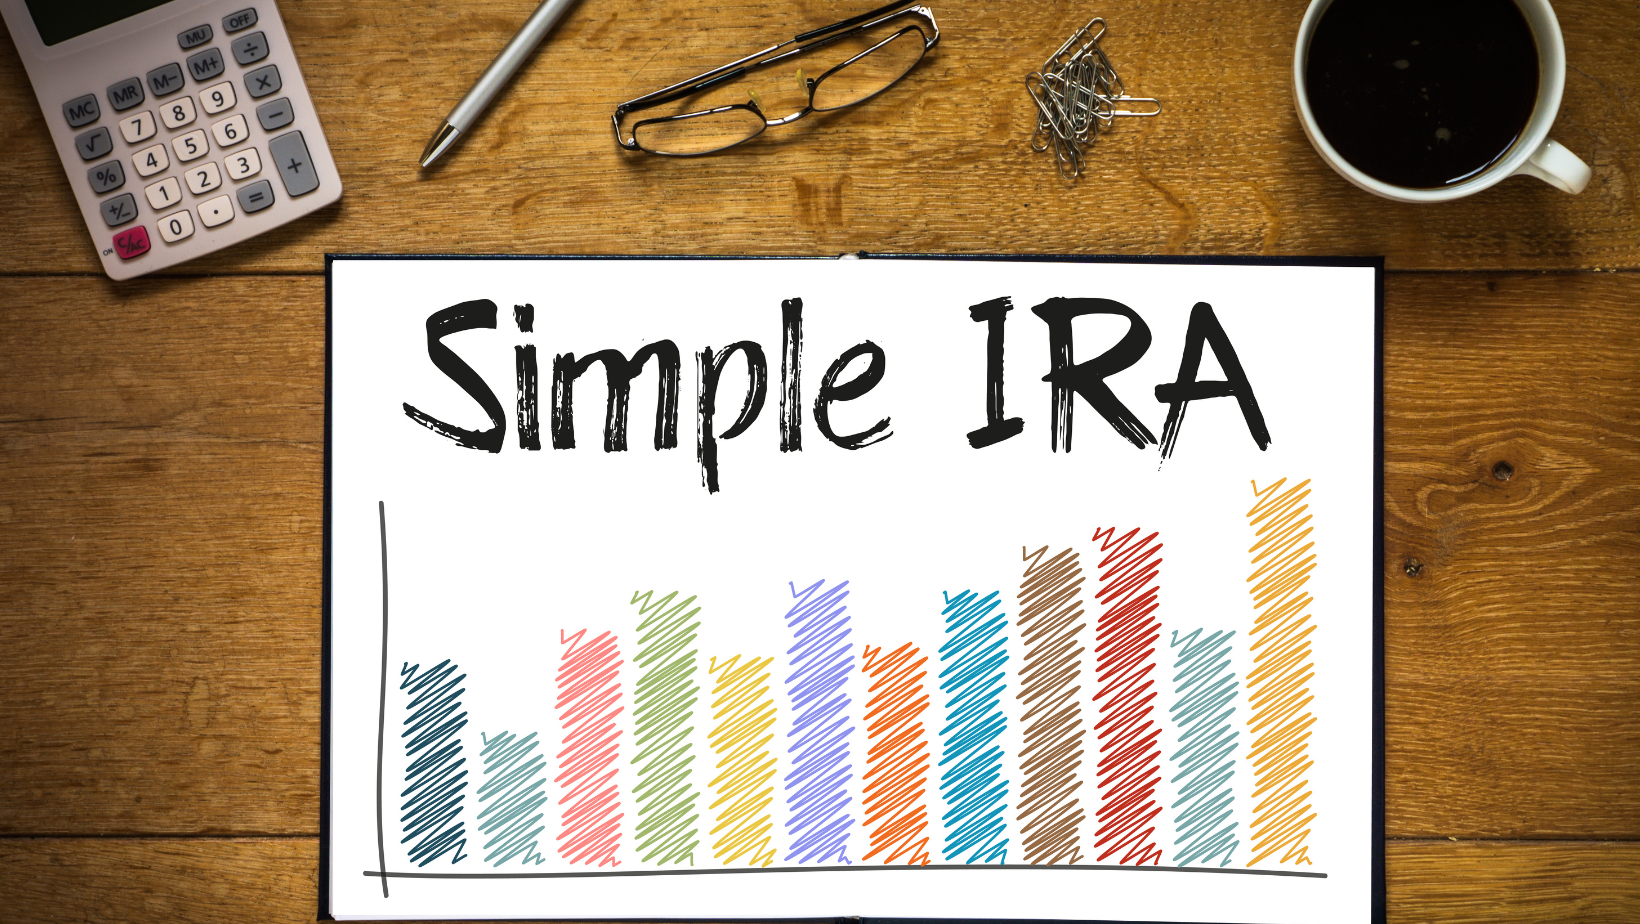 Factors to consider before setting up a Simple IRA